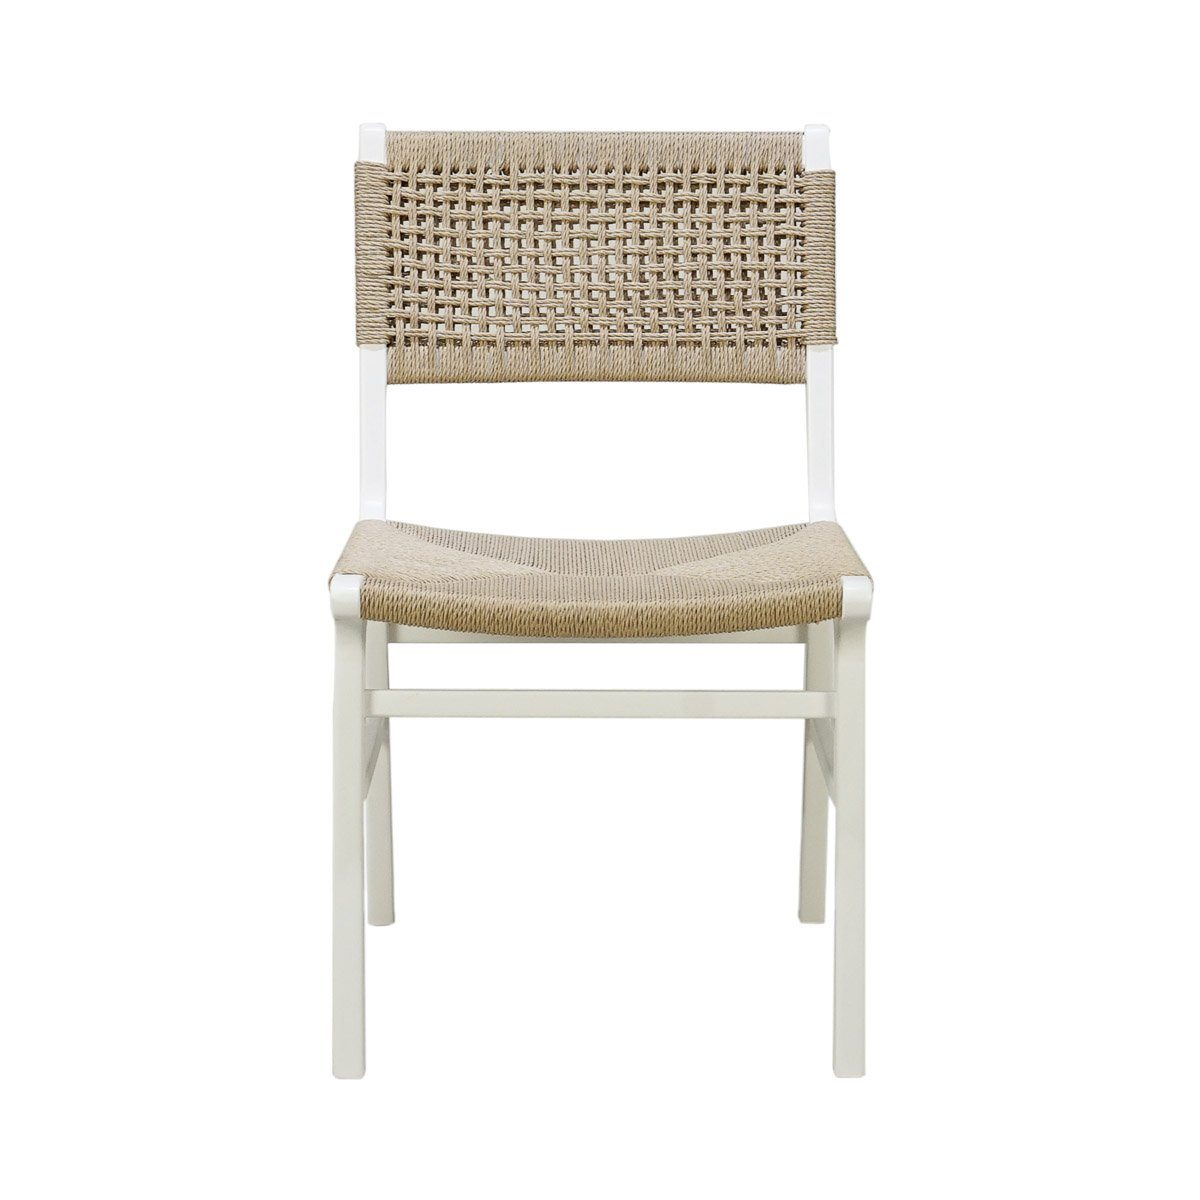 Munro Chair Matte White Lacquer. Front view.